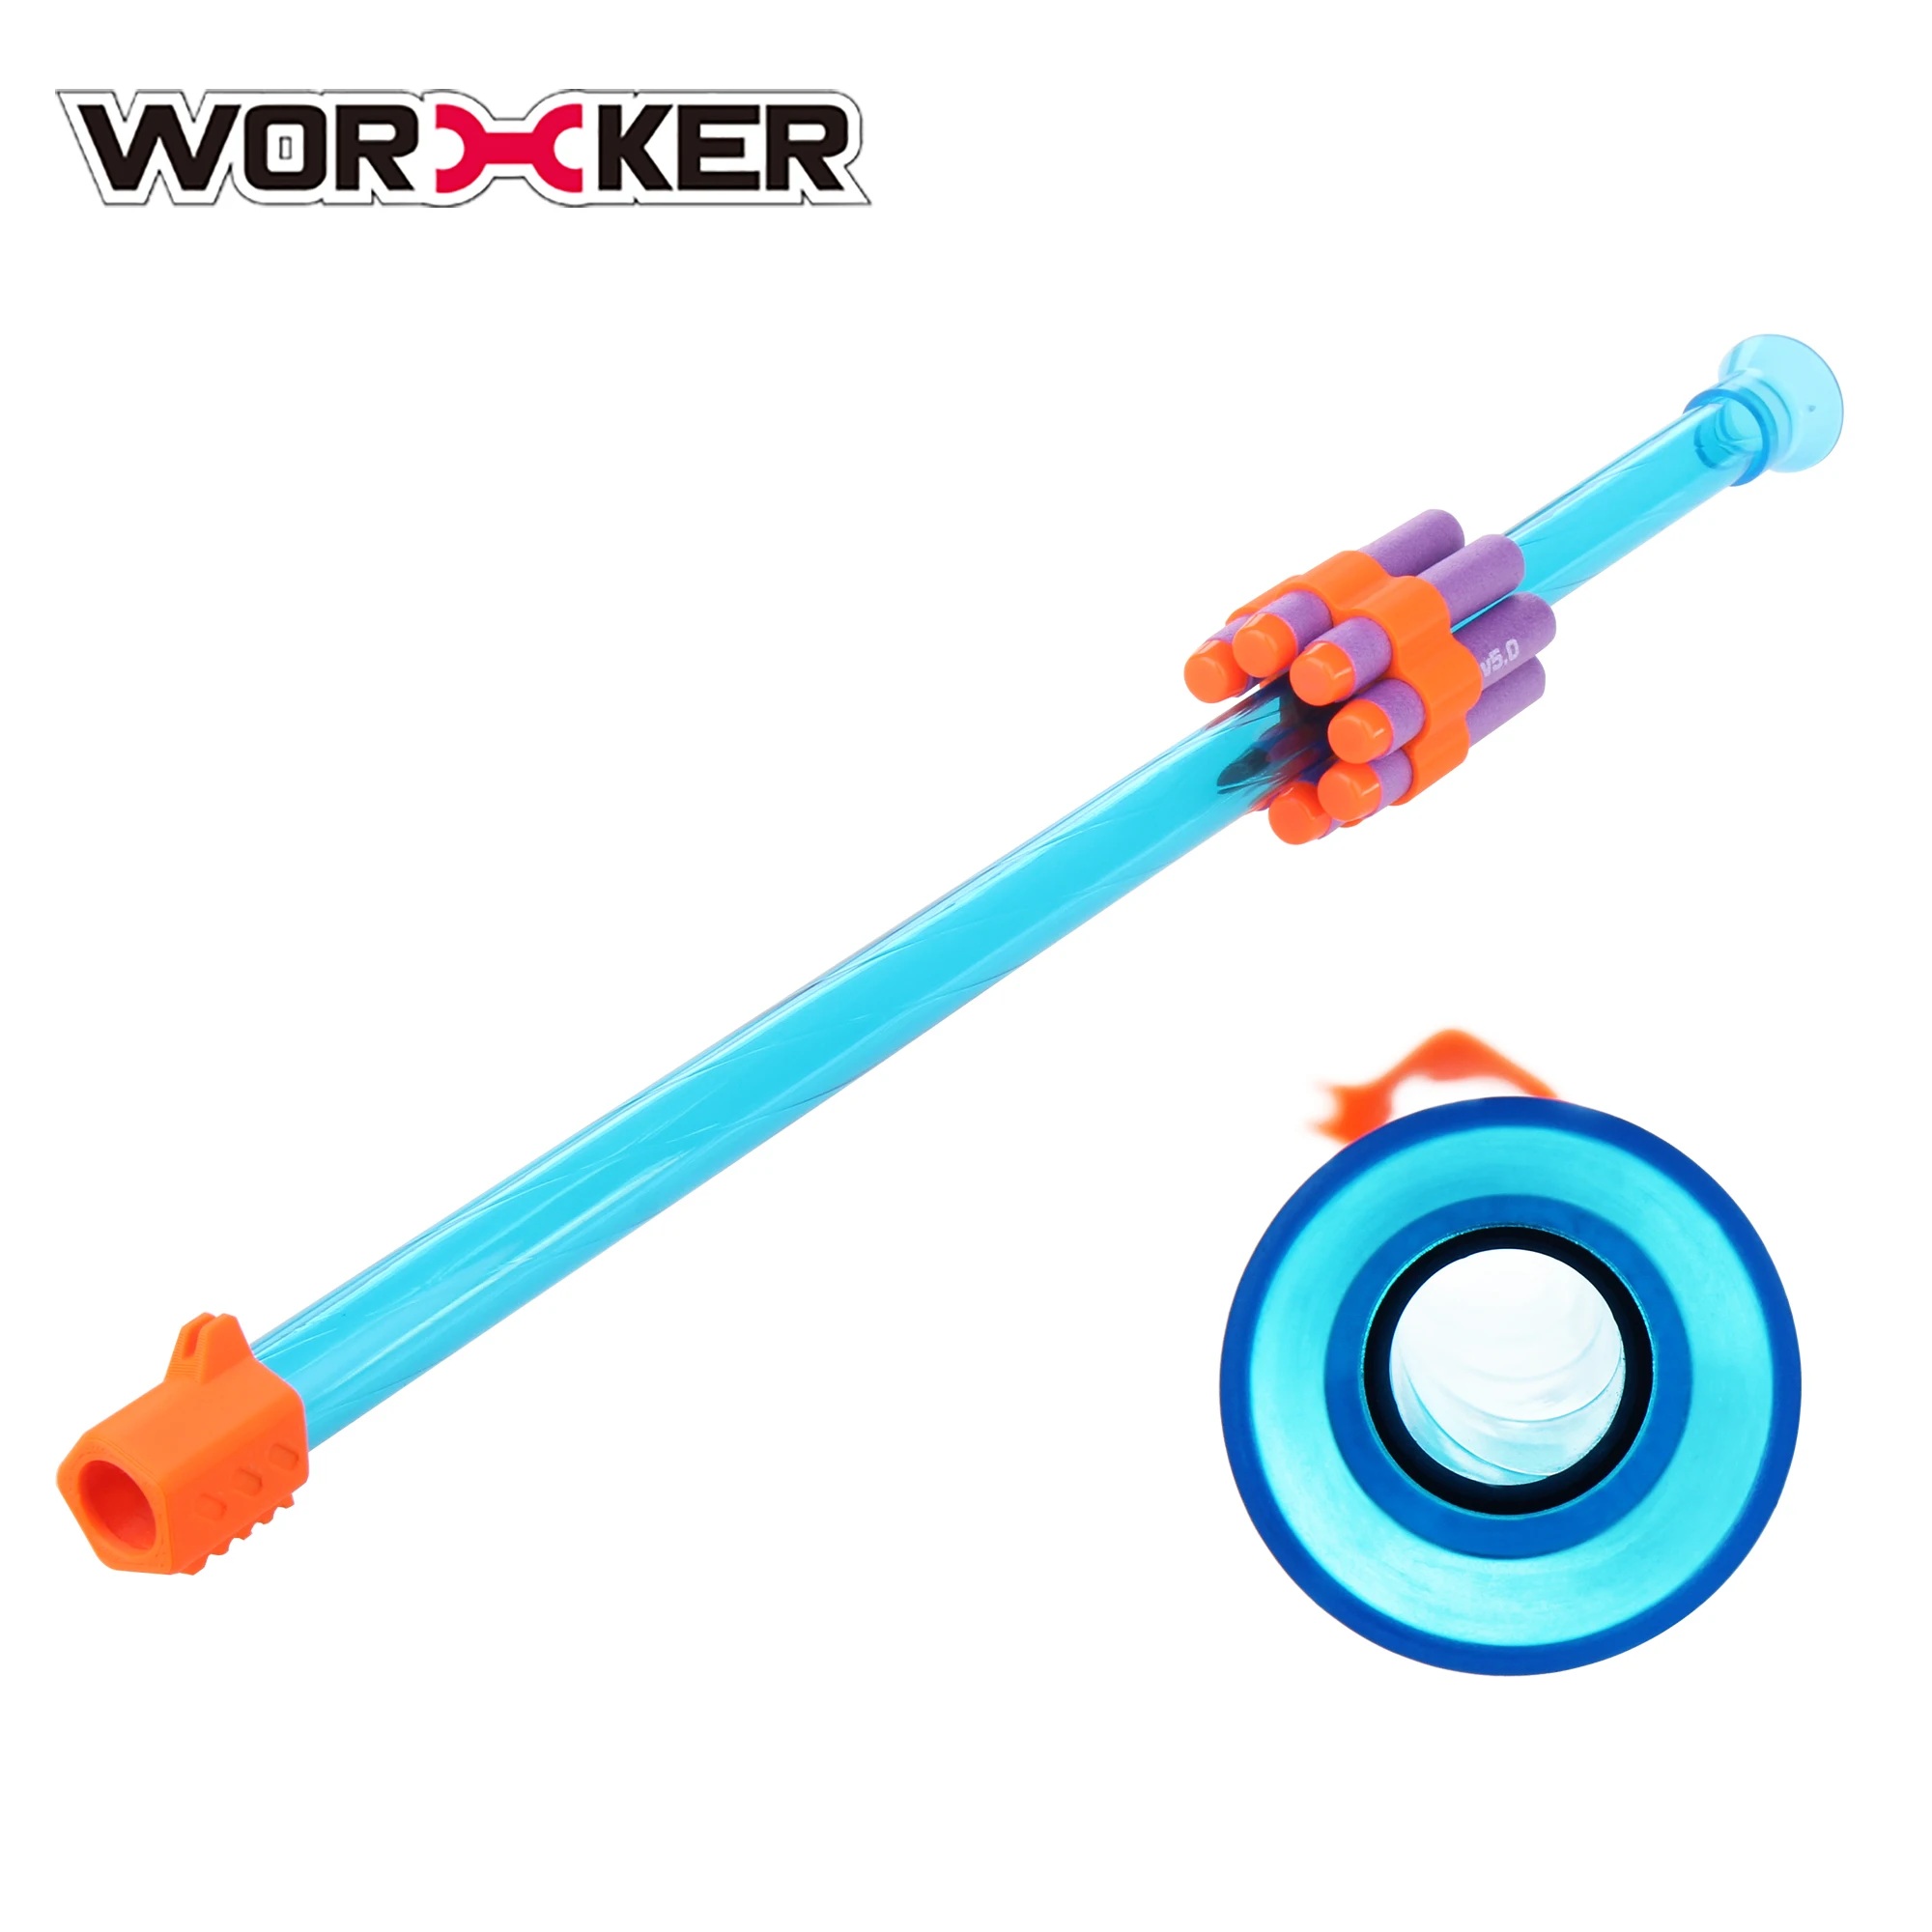 Worker Mod 50cm Blow Scar barrel Shooting Darts by Mouth Funny Toy for Nerf Dart 